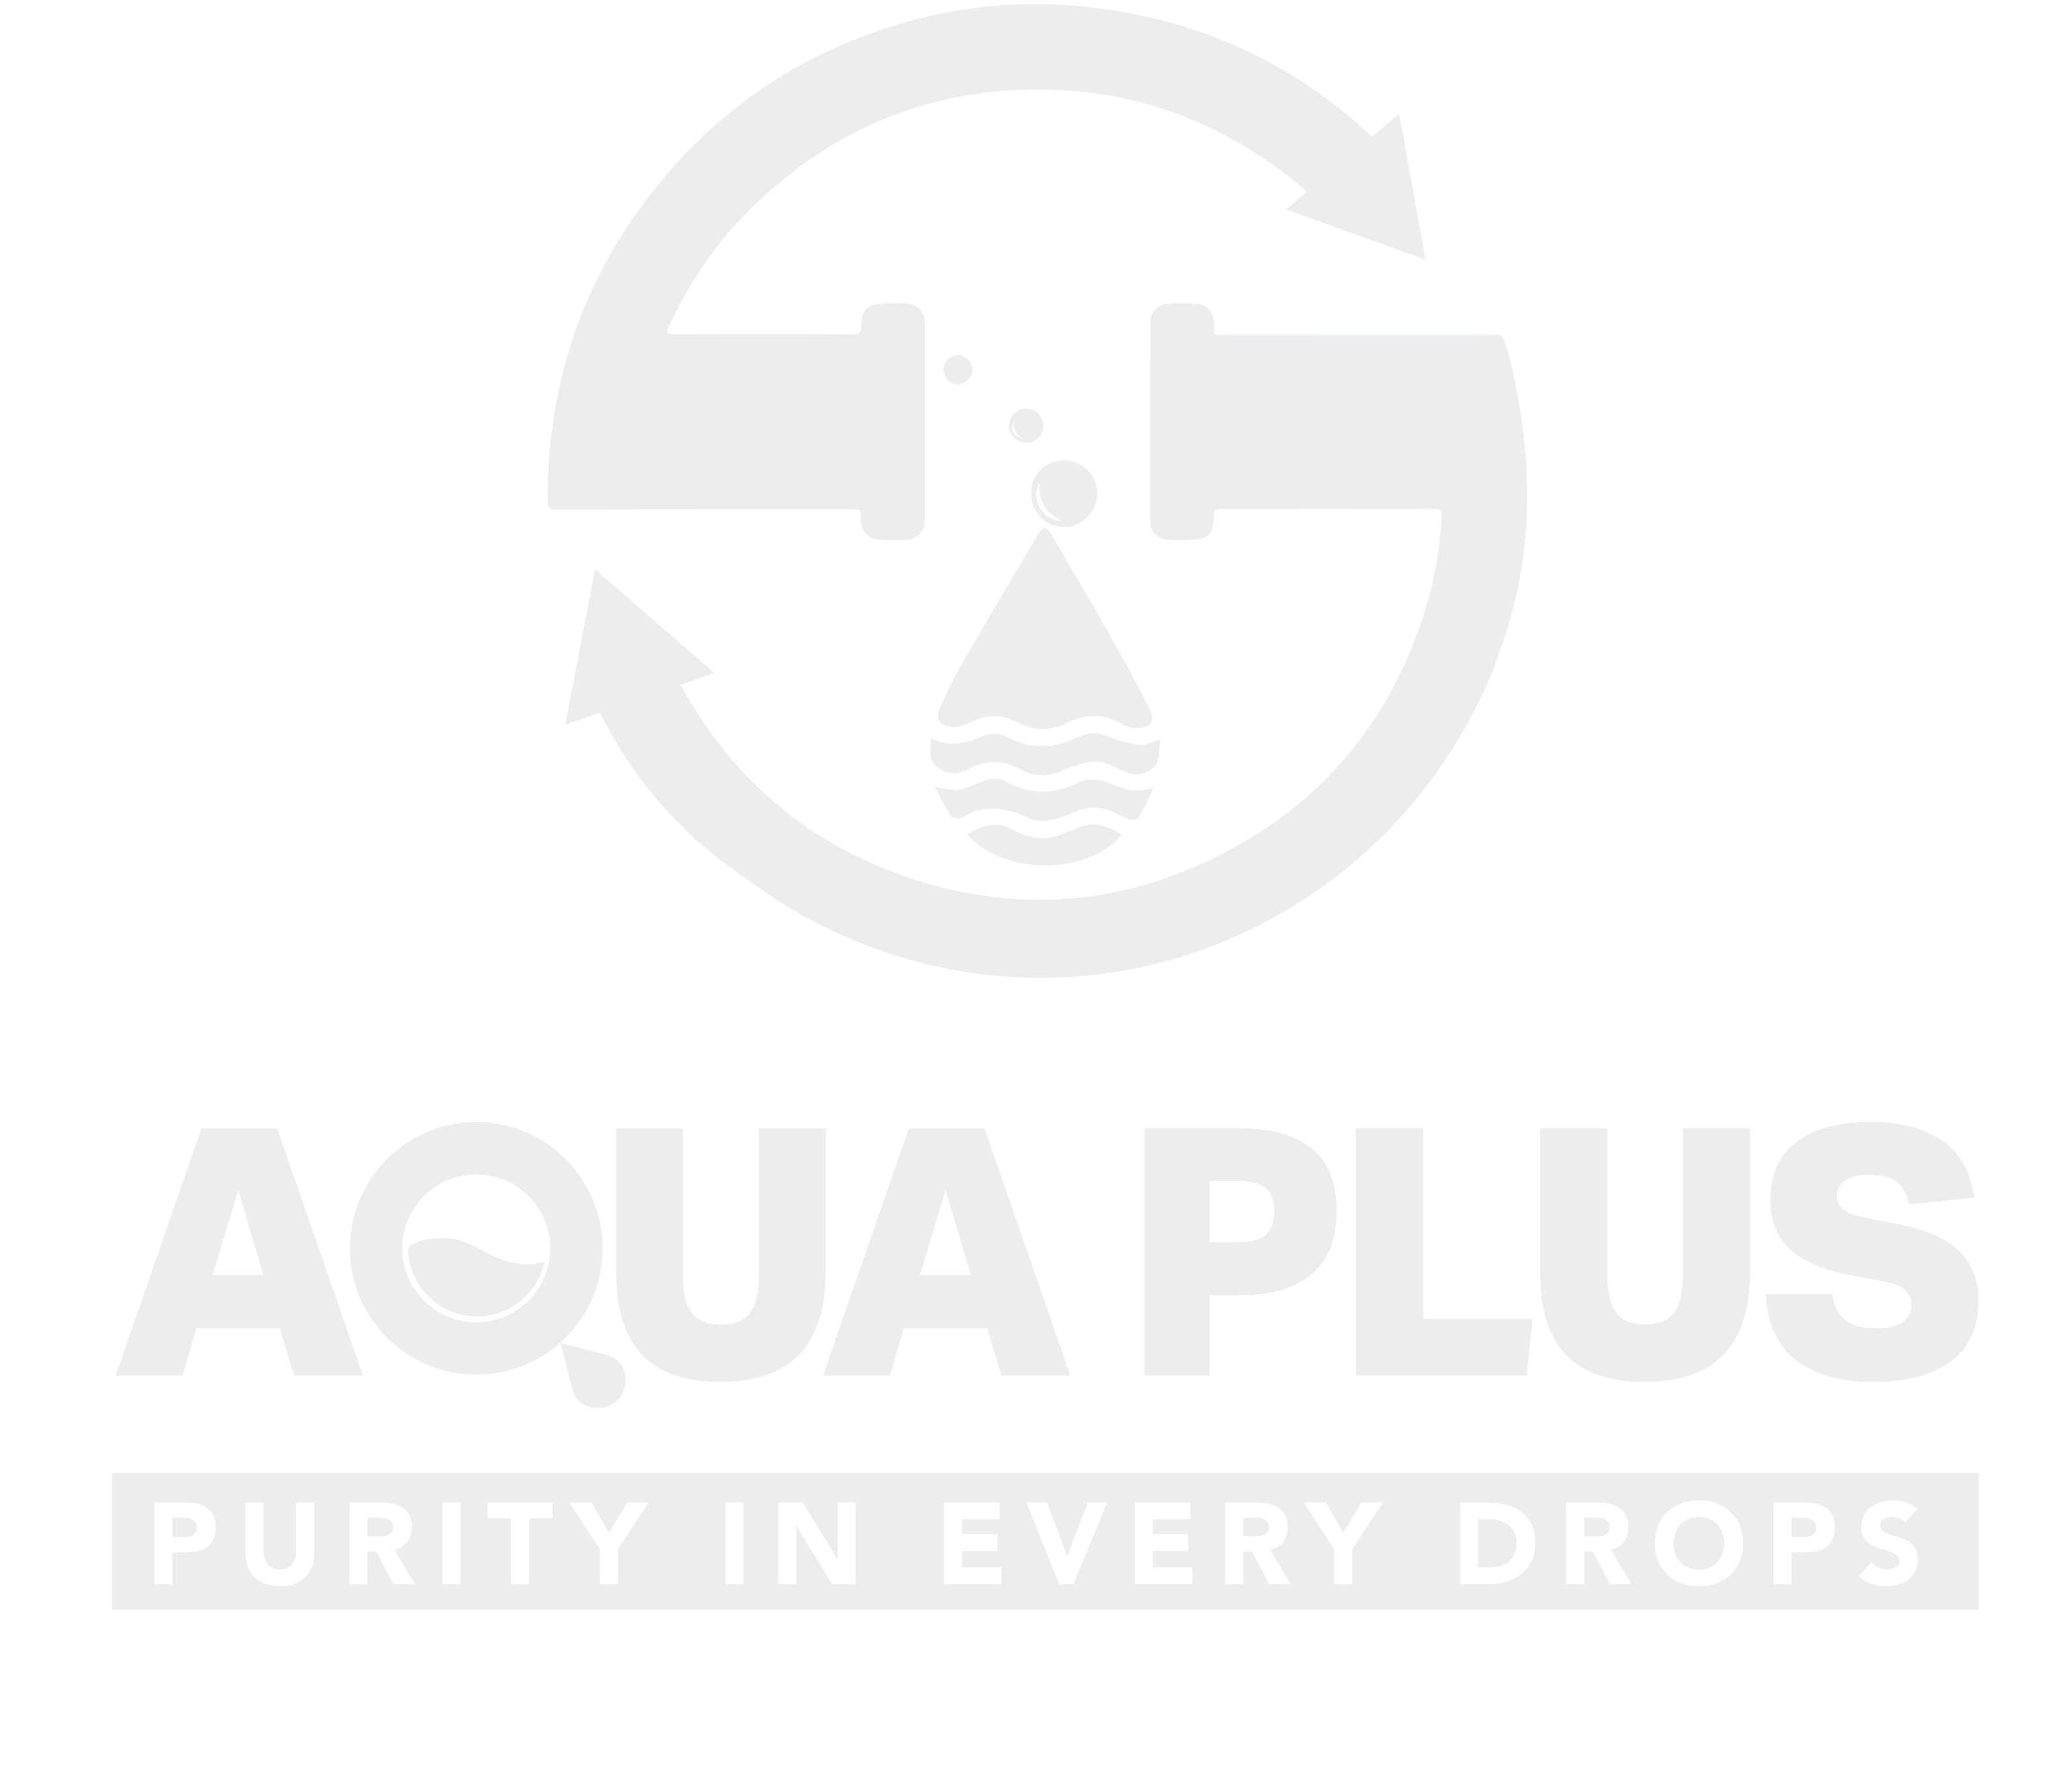 Aqua Plus – Water Solutions for a Changing World